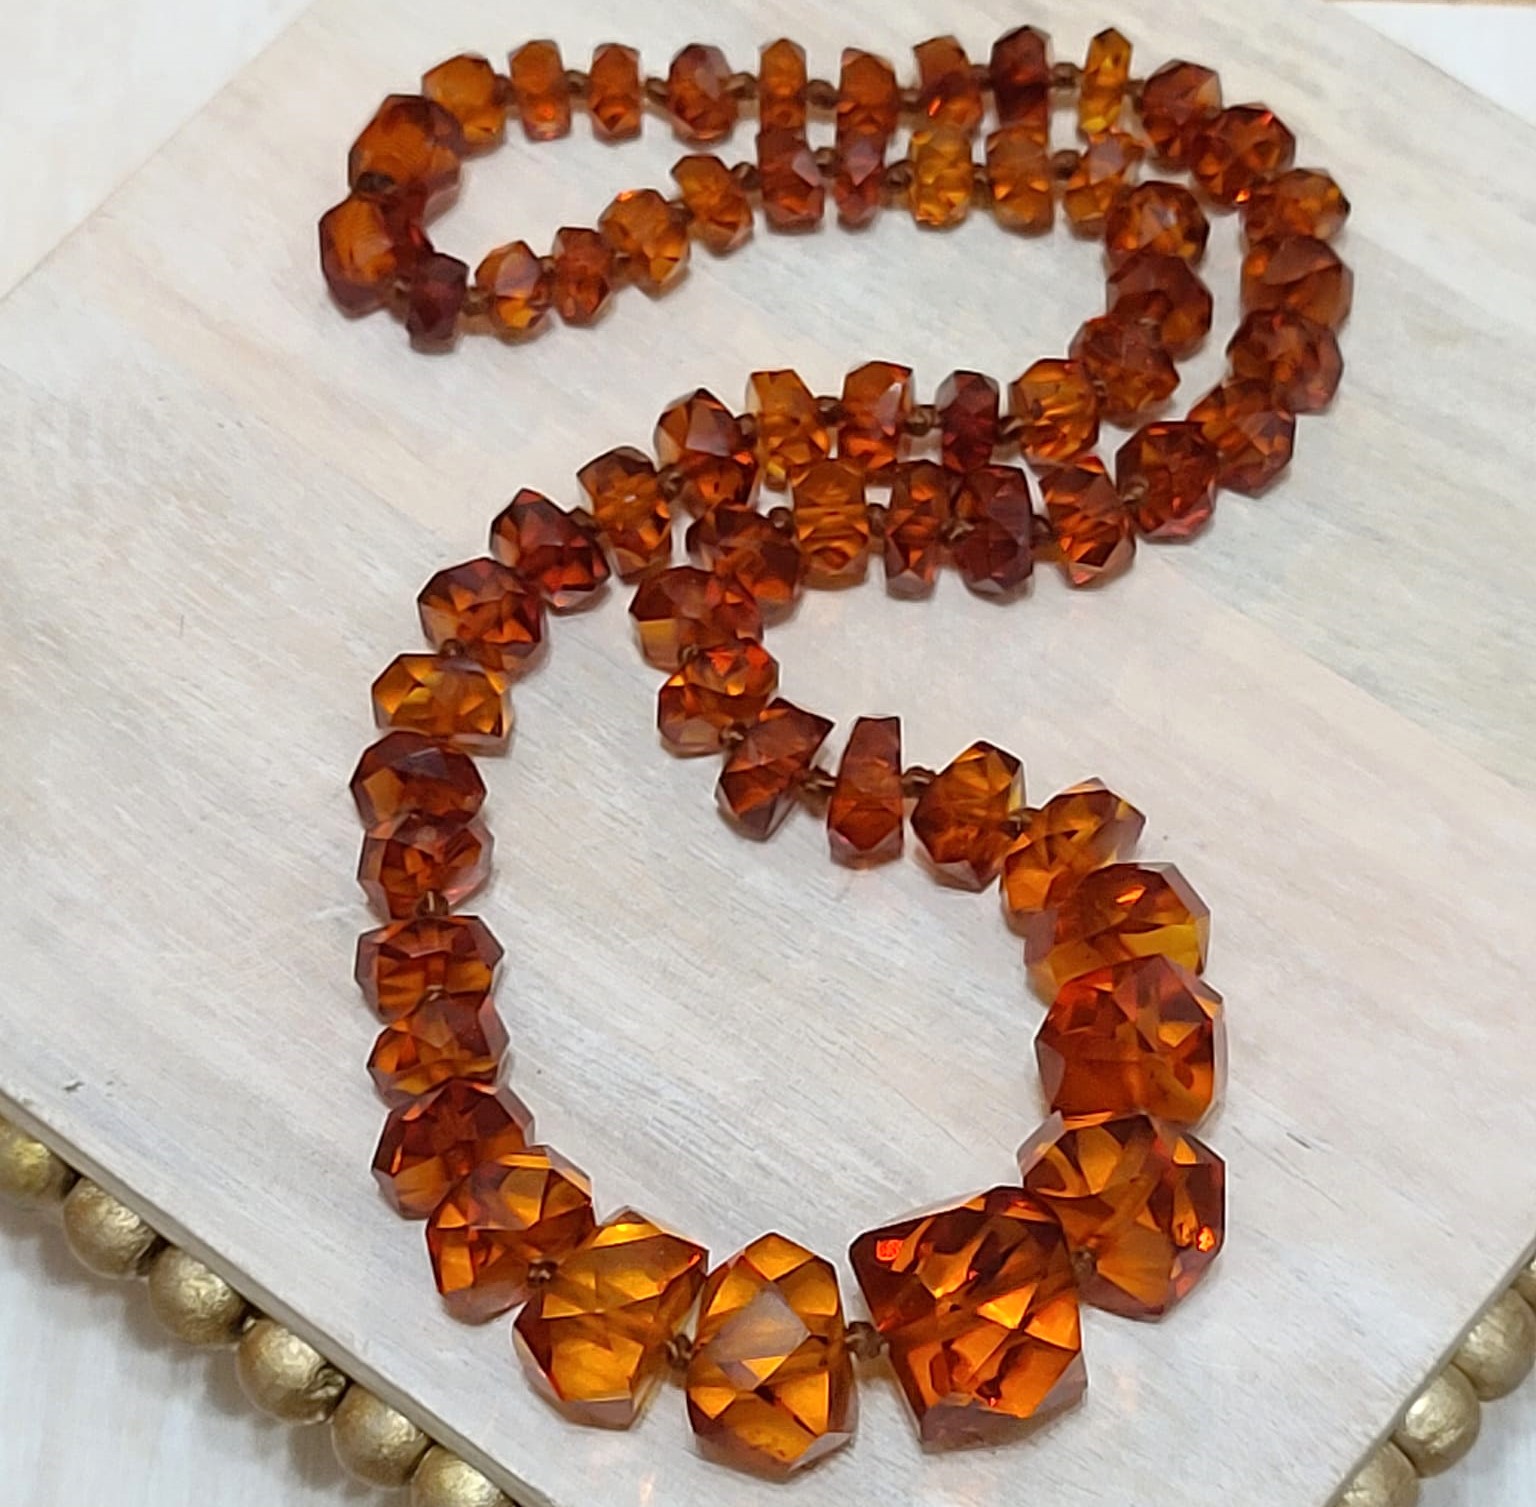 Estate necklace, baltic amber, varigated from large to small, knotted amber, 33 inches long